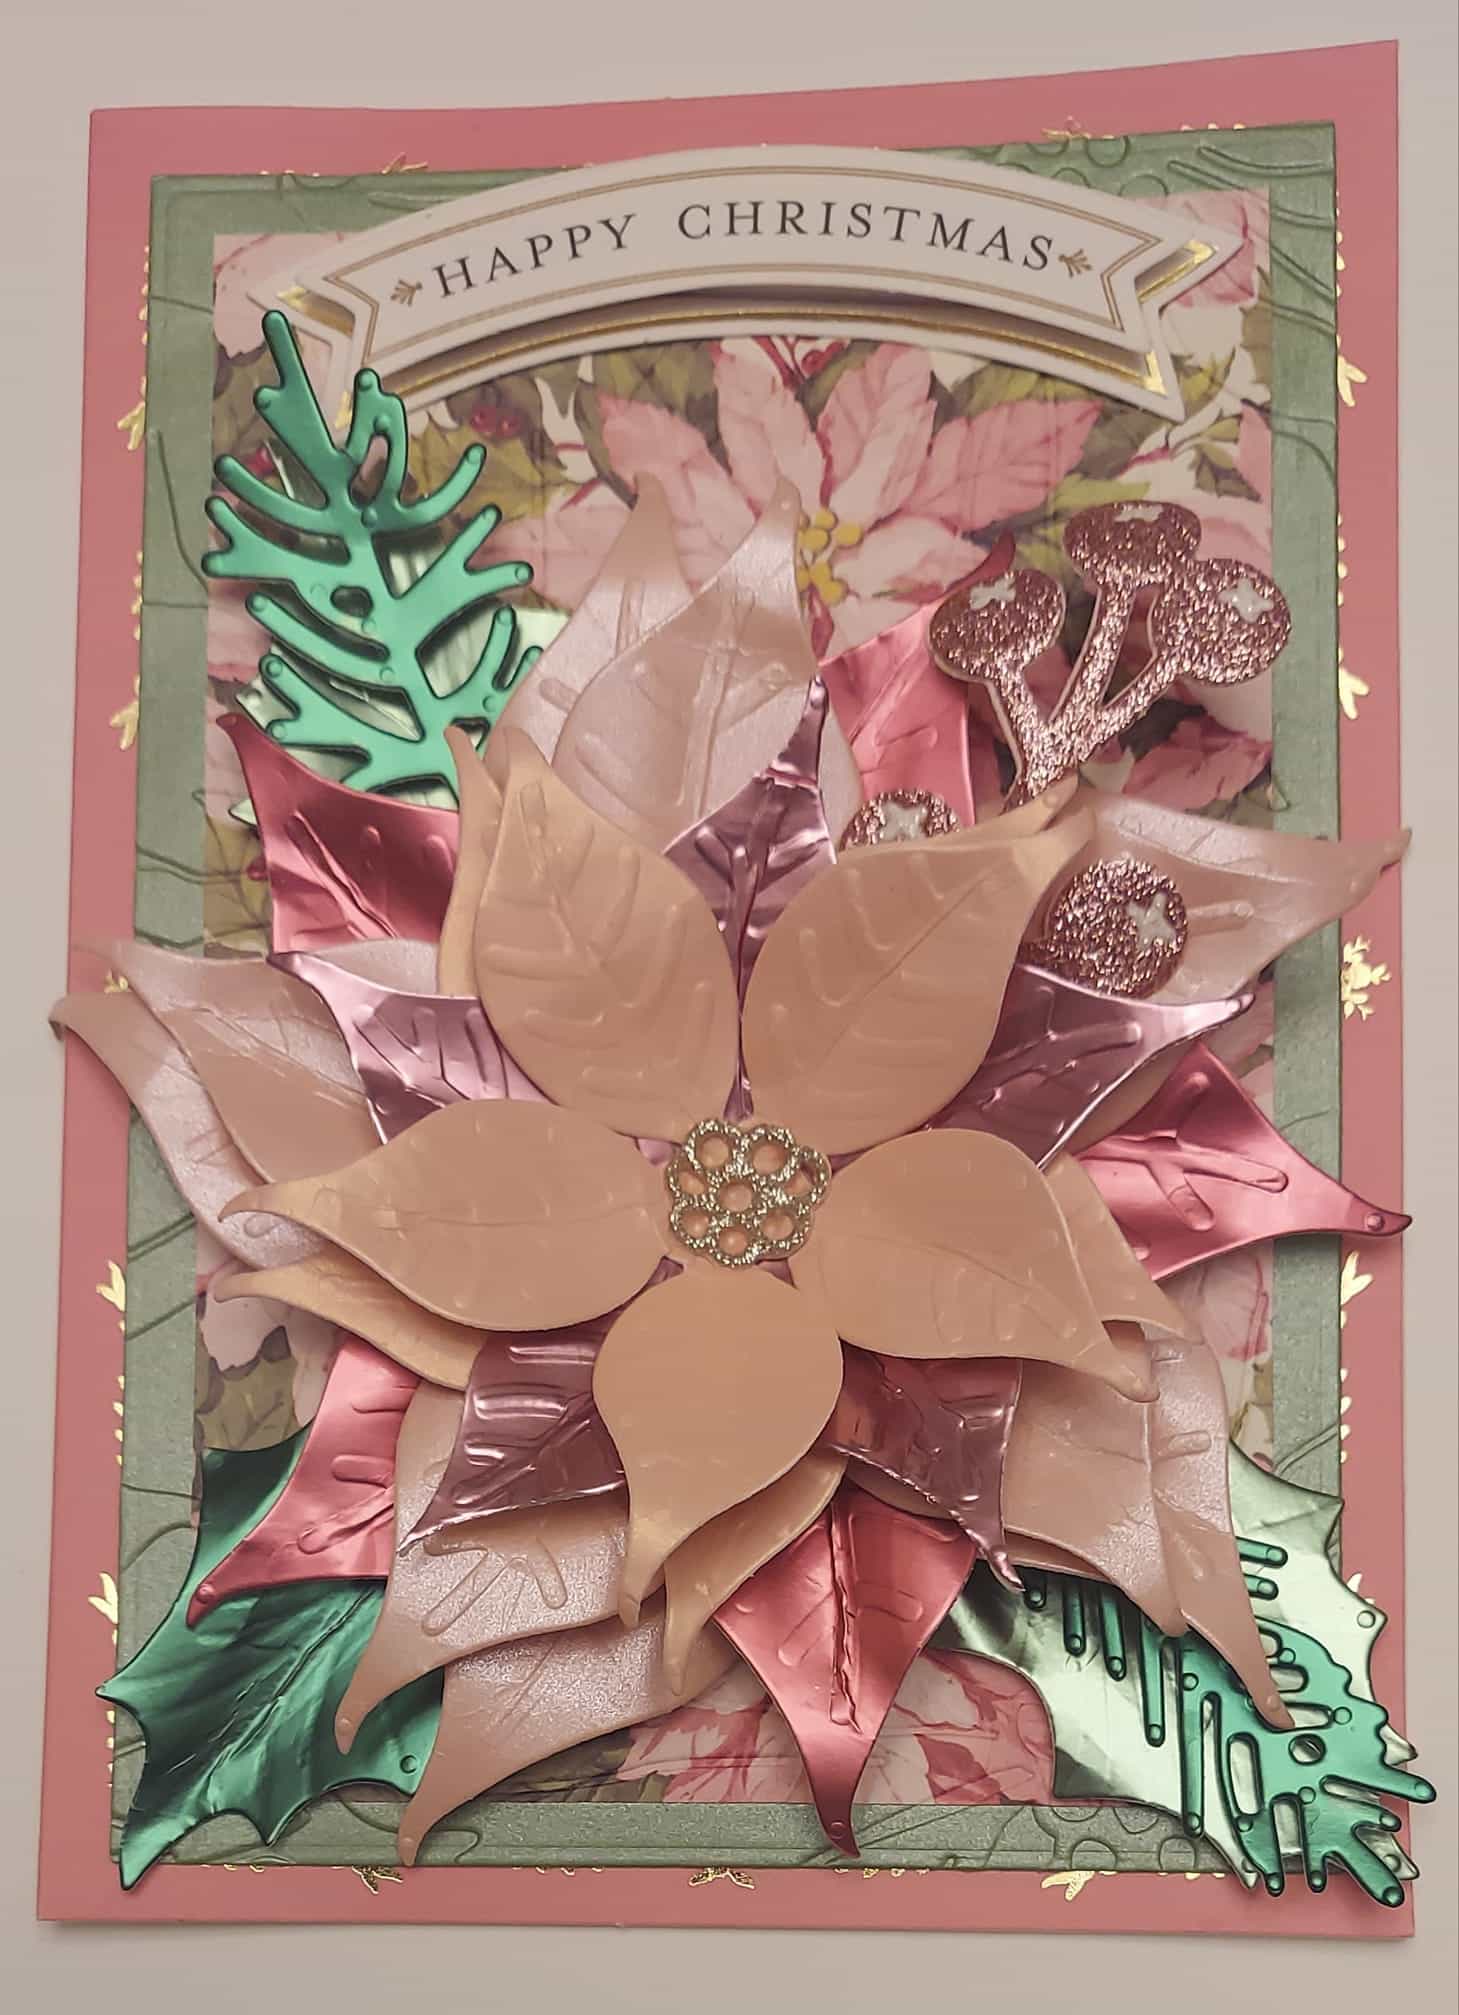 A christmas card with a poinsettia on it.